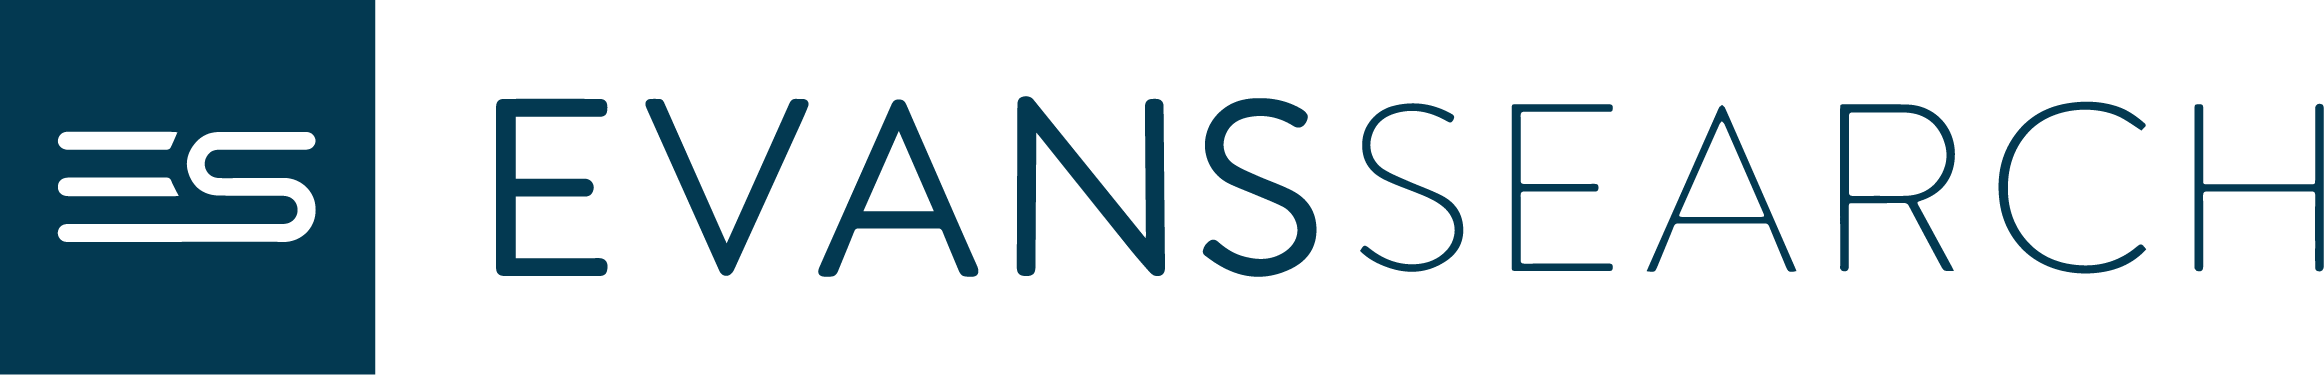 Evans Search | A Fresh Approach To Executive Search